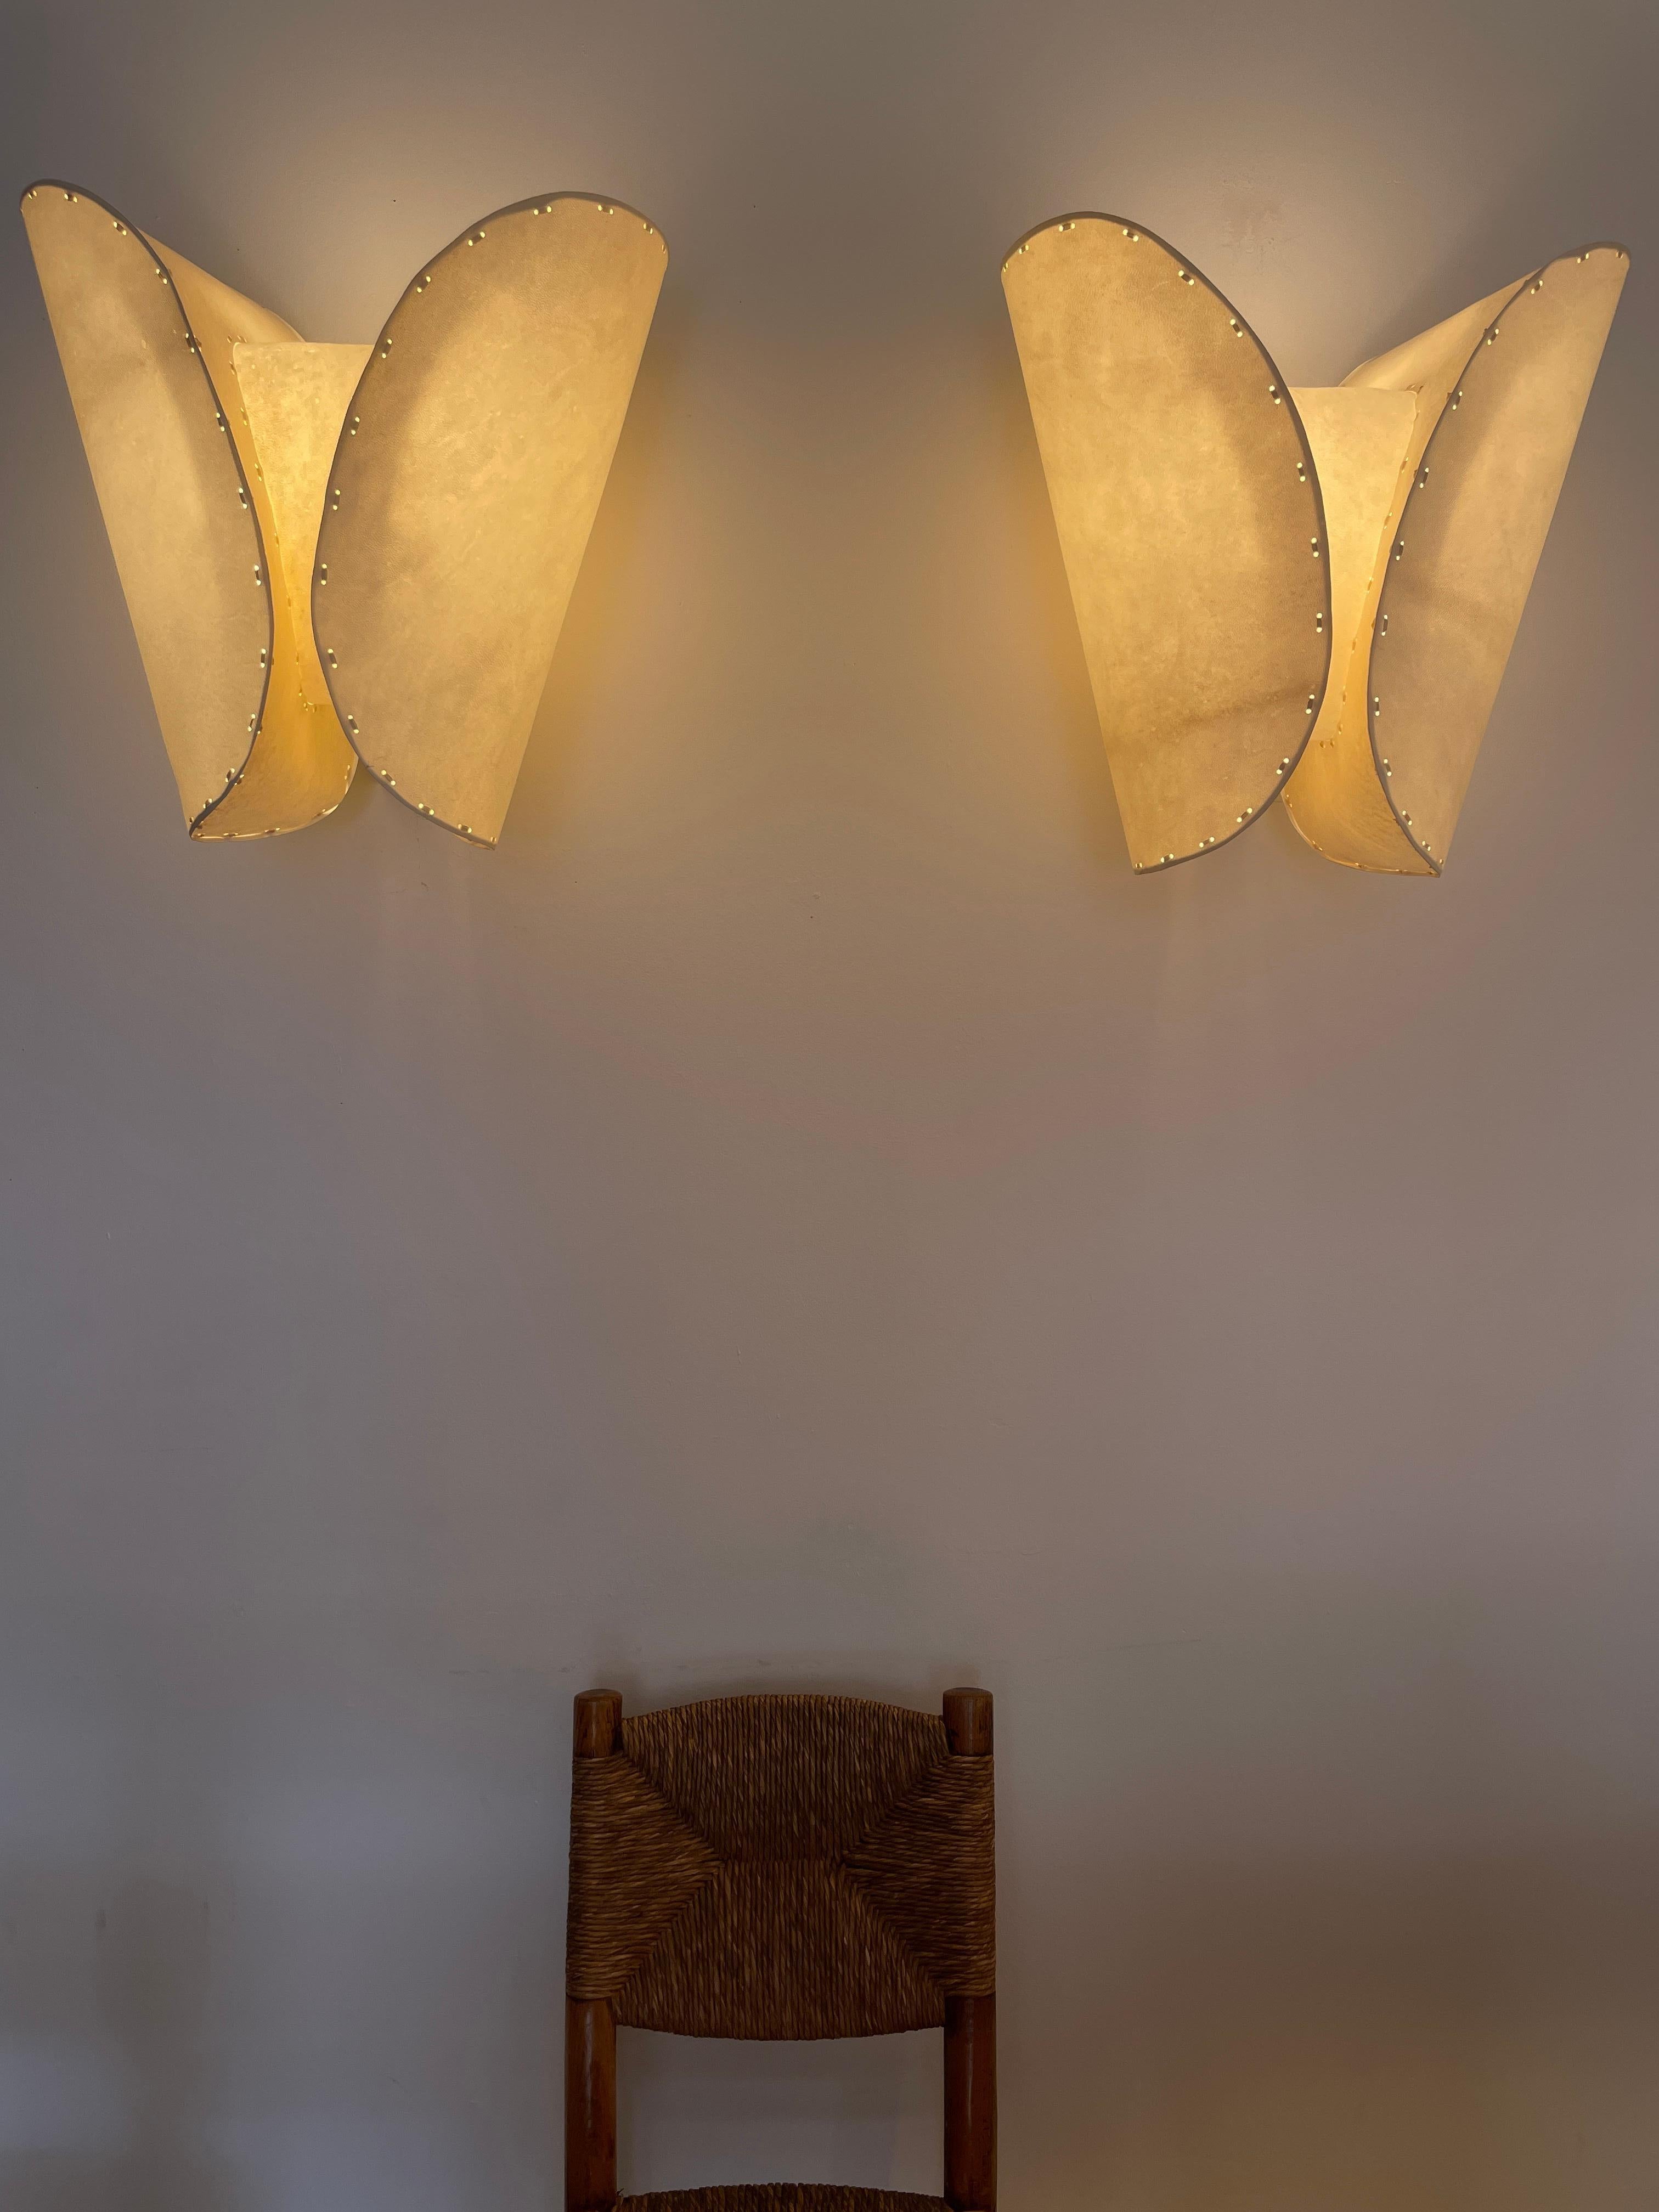 Mauro Fabbro “Gstaad” Wall Lamps Sconce  Alexandre Biaggi  Botega Volta. Signed  For Sale 4